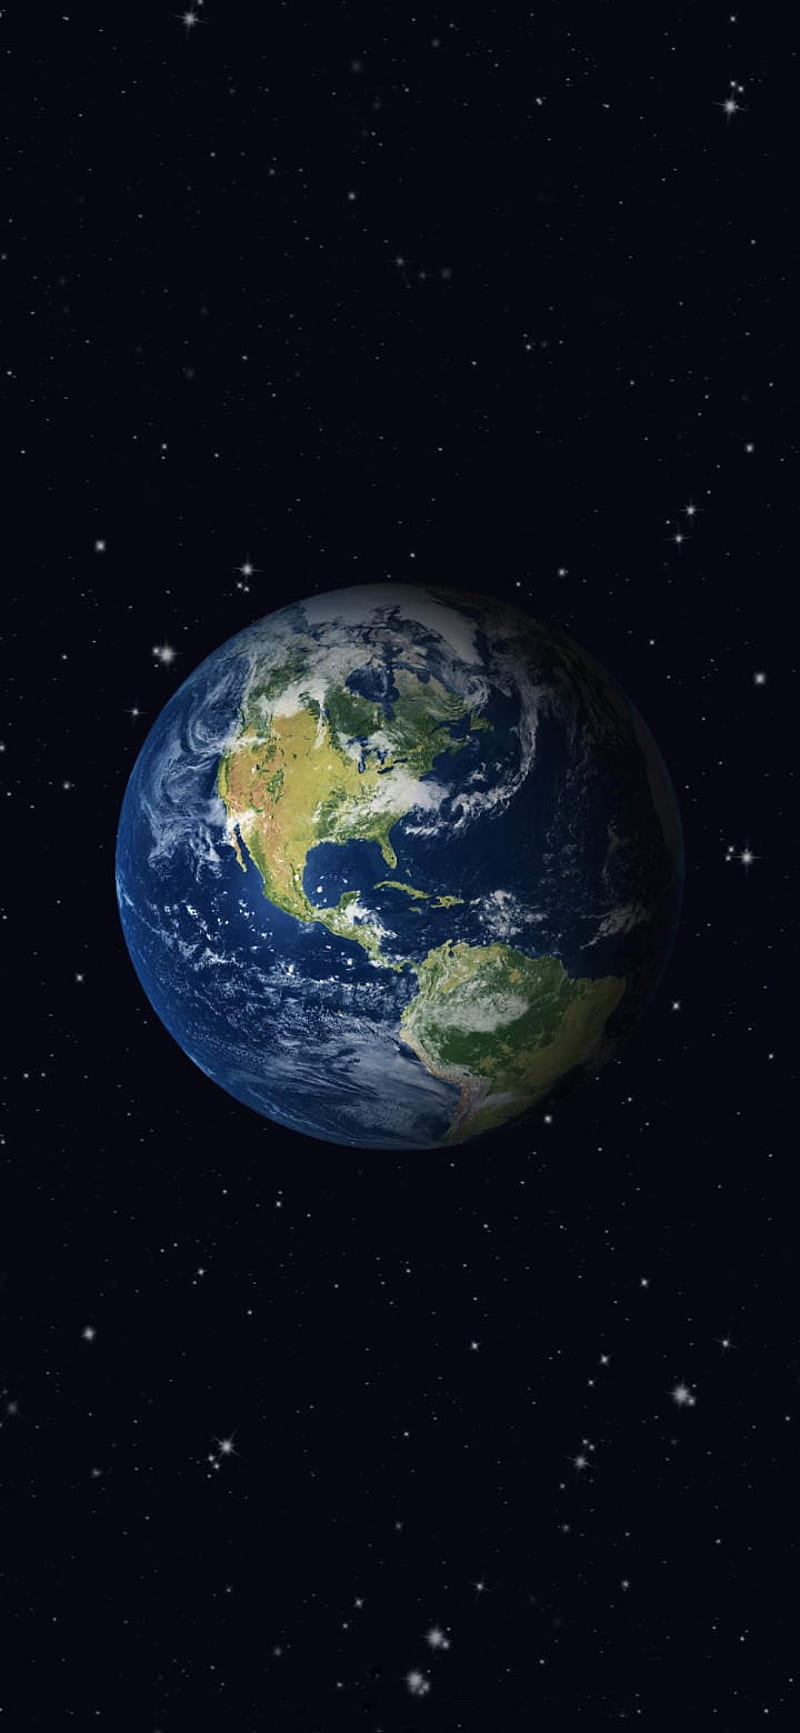 IPhone wallpaper of the earth in space - Earth